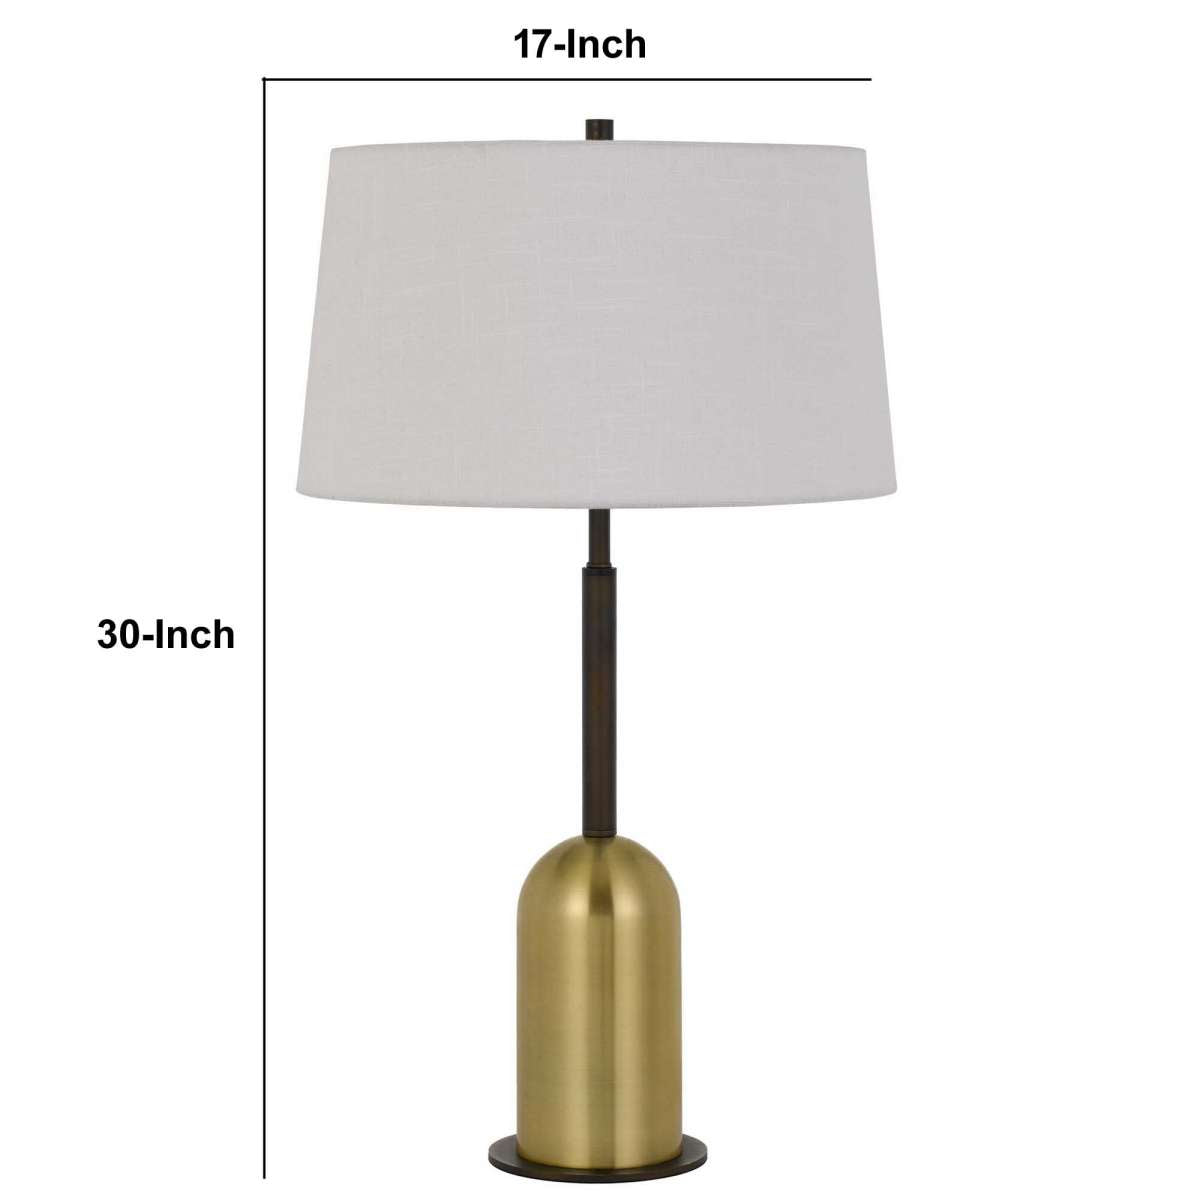 30" Metal Desk Lamp With Drum Style Shade, Brown And Gold By Benzara